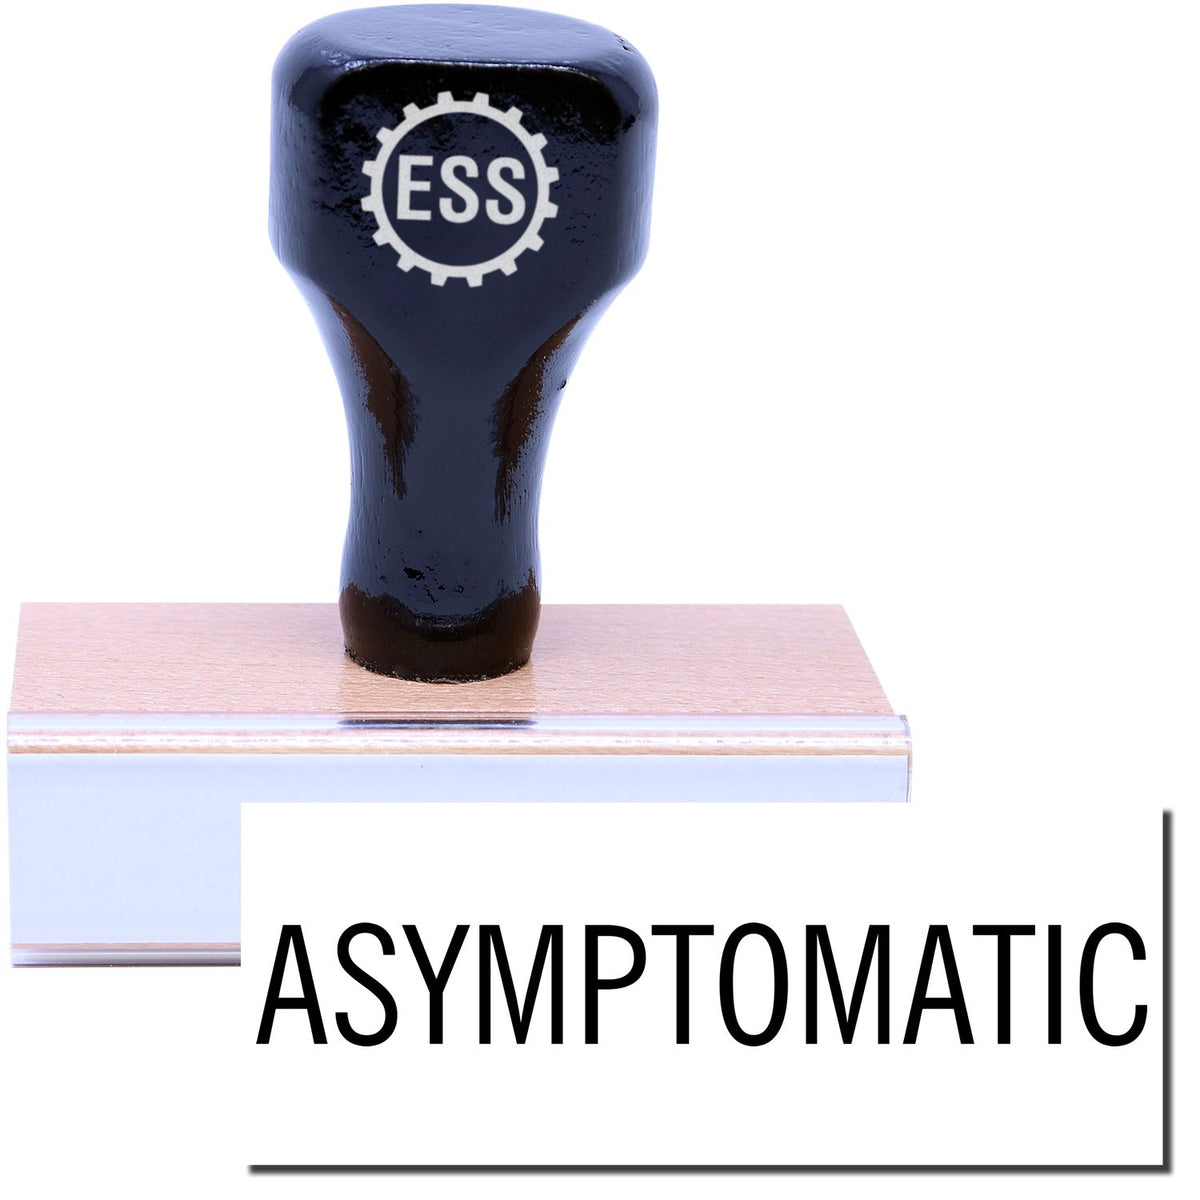 A stock office rubber stamp with a stamped image showing how the text &quot;ASYMPTOMATIC&quot; in a large font is displayed after stamping.